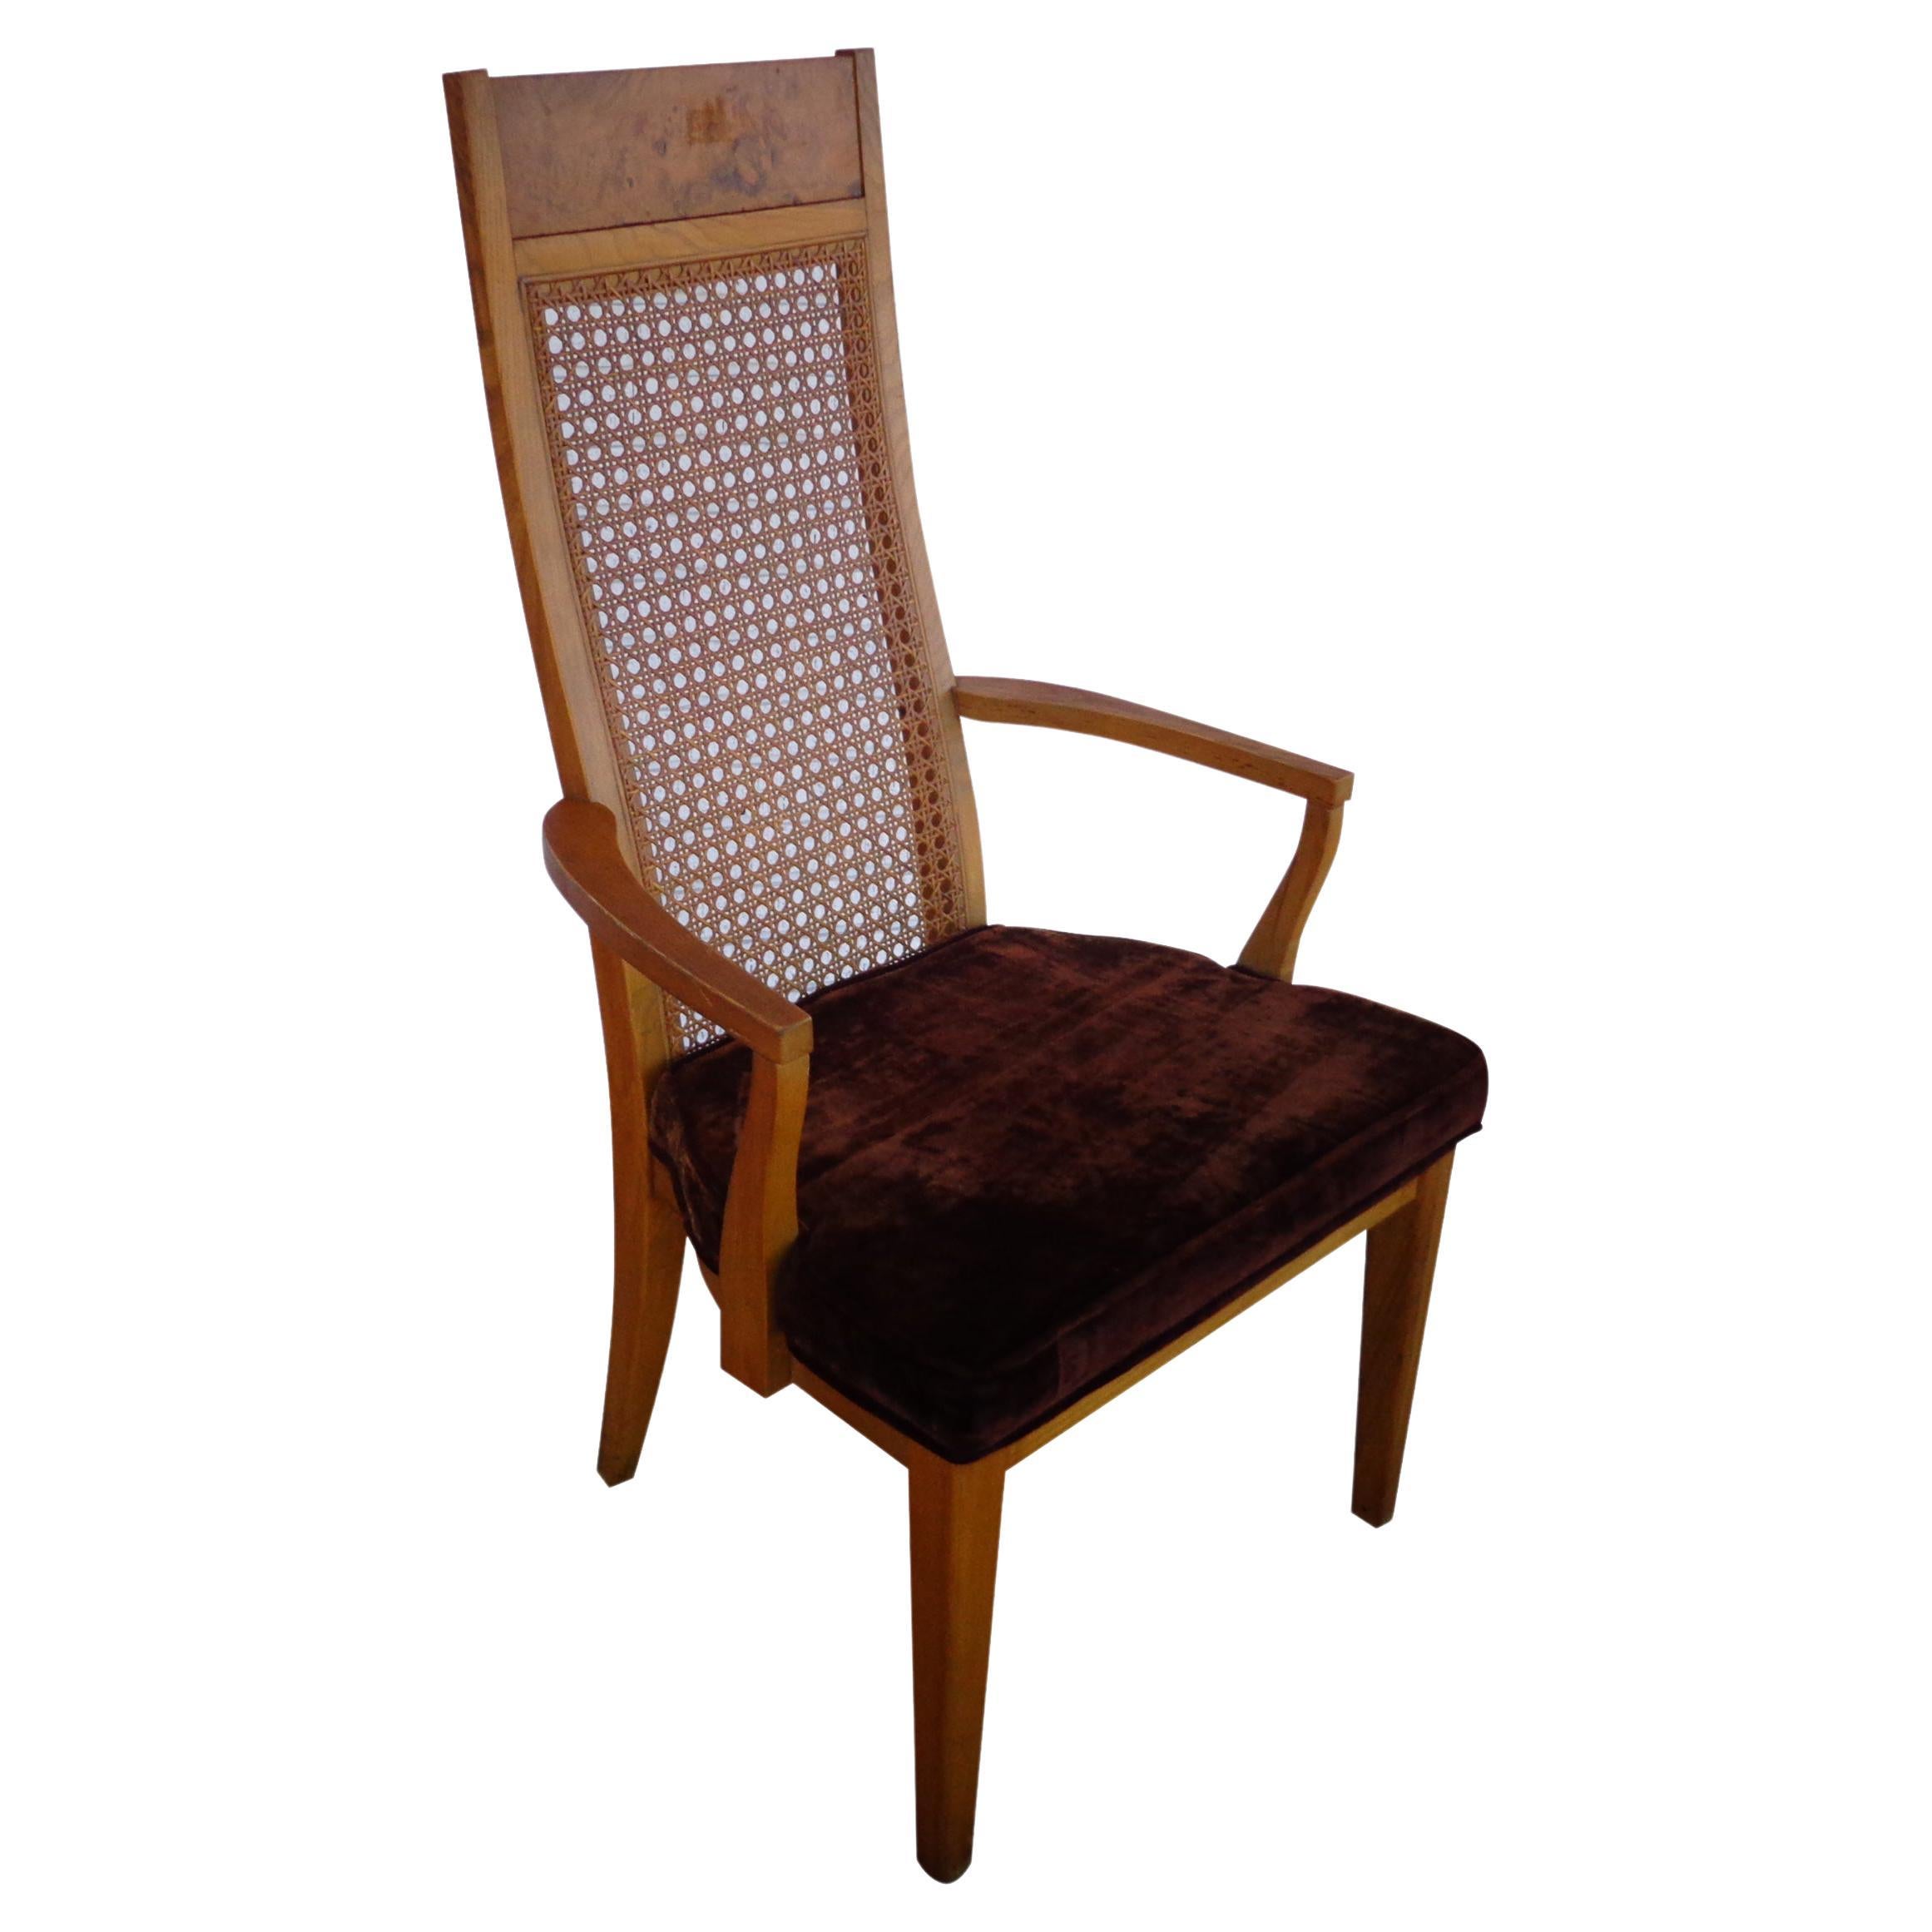 (1) Lane High Back Cane Burl Dining Chairs  6 AVAILABLE